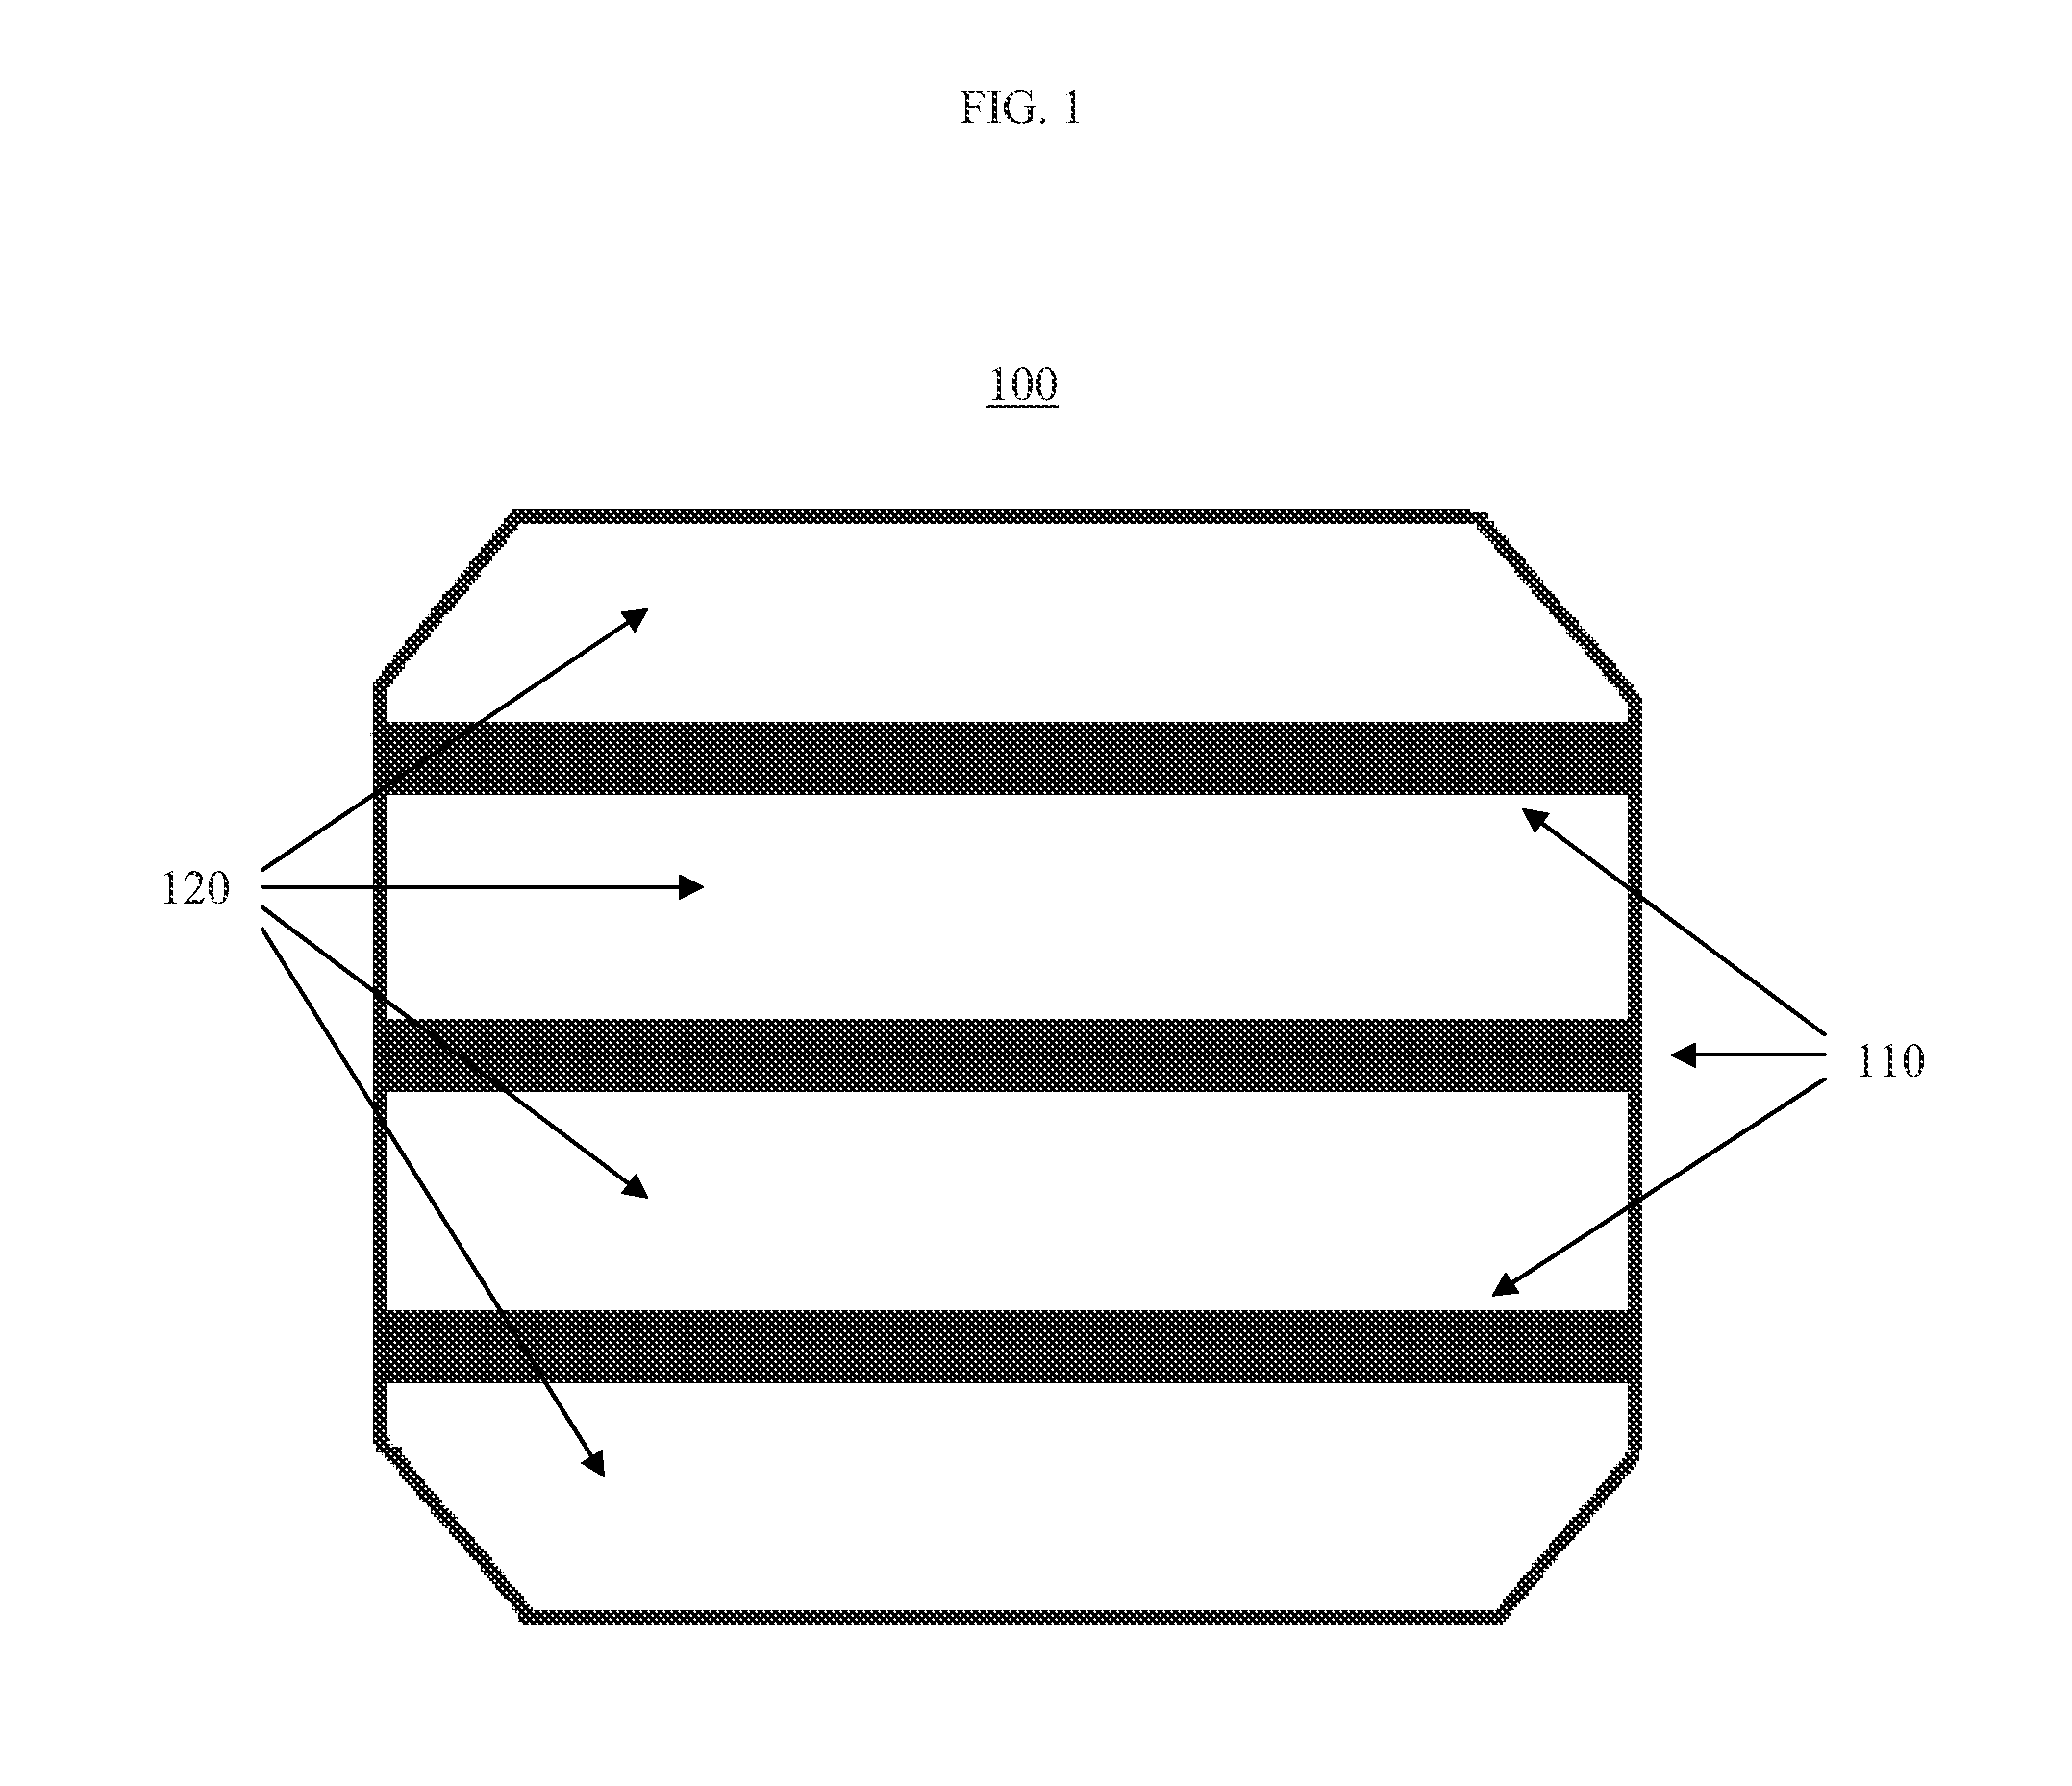 Electroconductive paste with adhesion enhancer